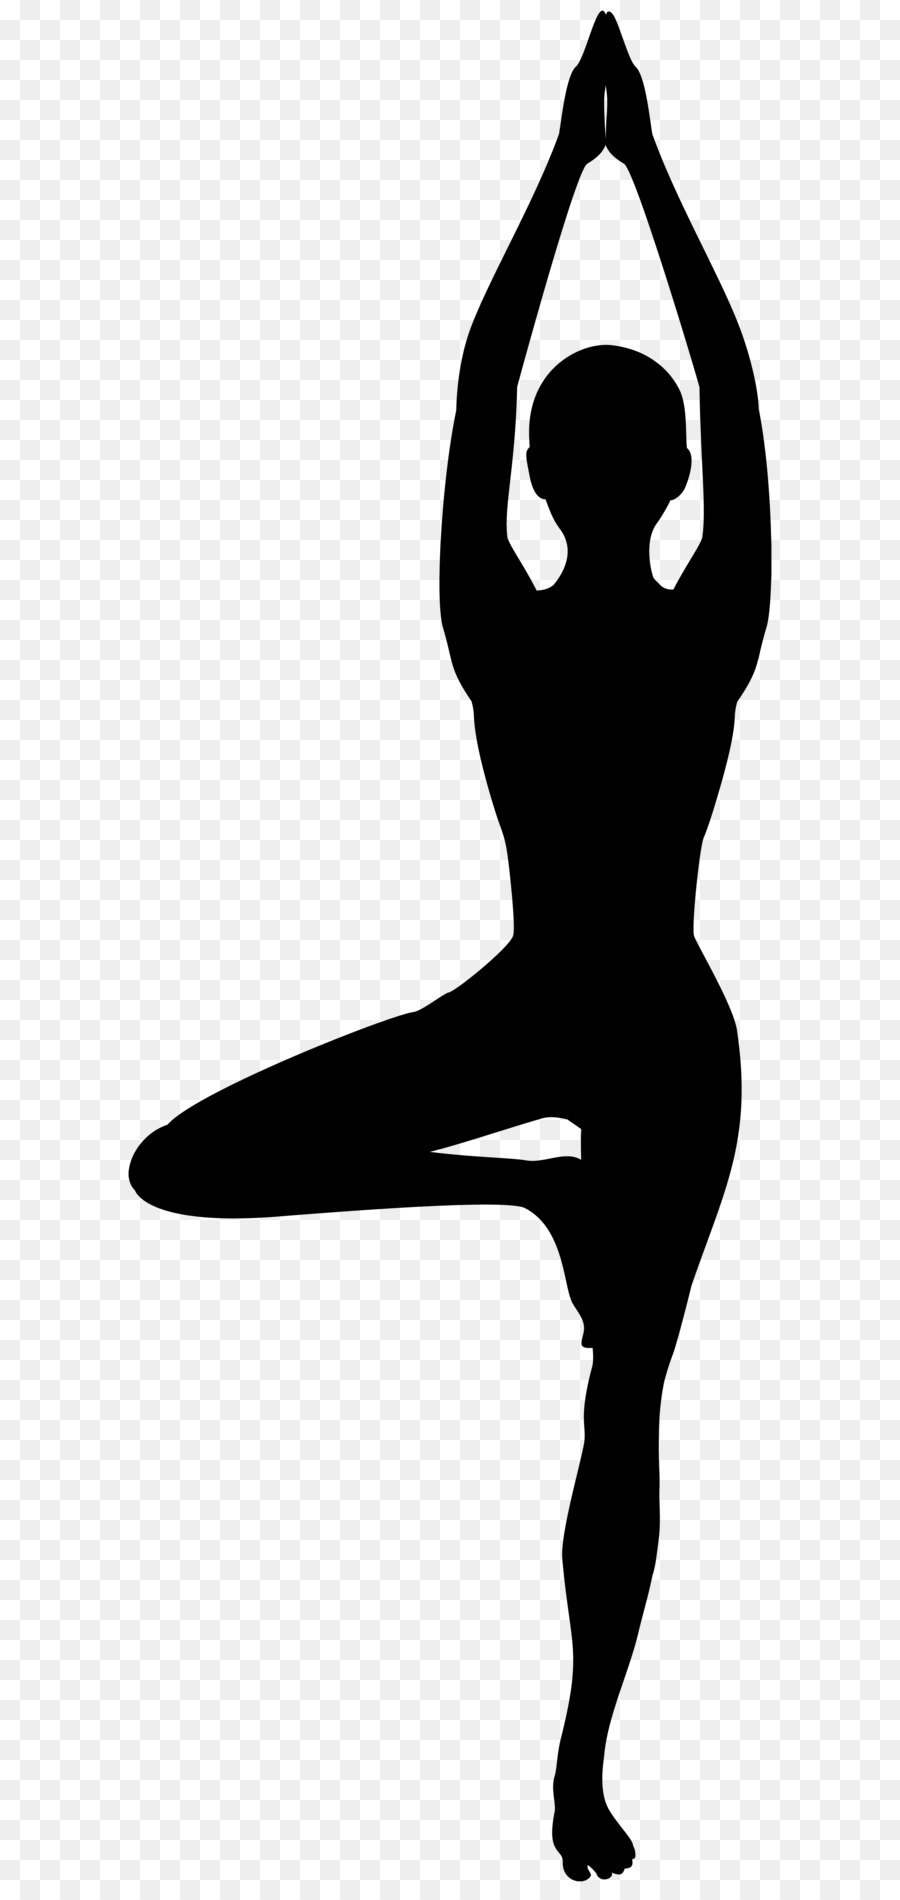 Yoga Silhouette Pixabay - Yoga Silhouette PNG clipart